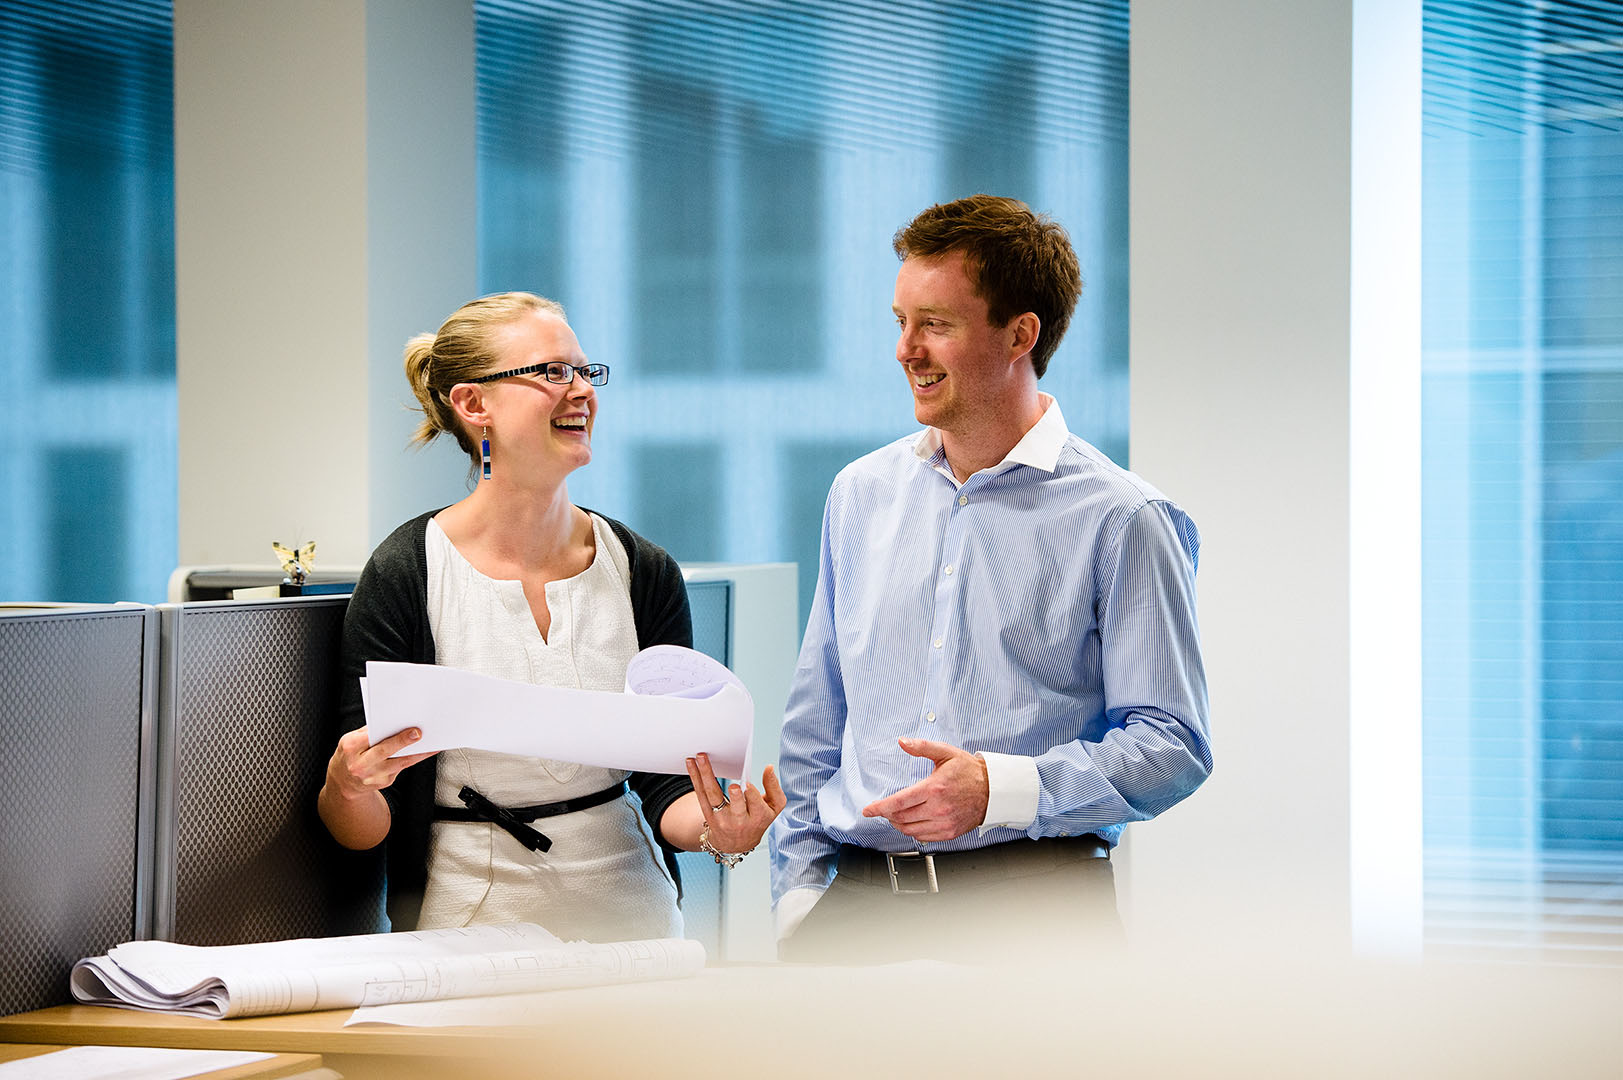 Two work colleagues, man and woman laughing and smiling in conversation in the office